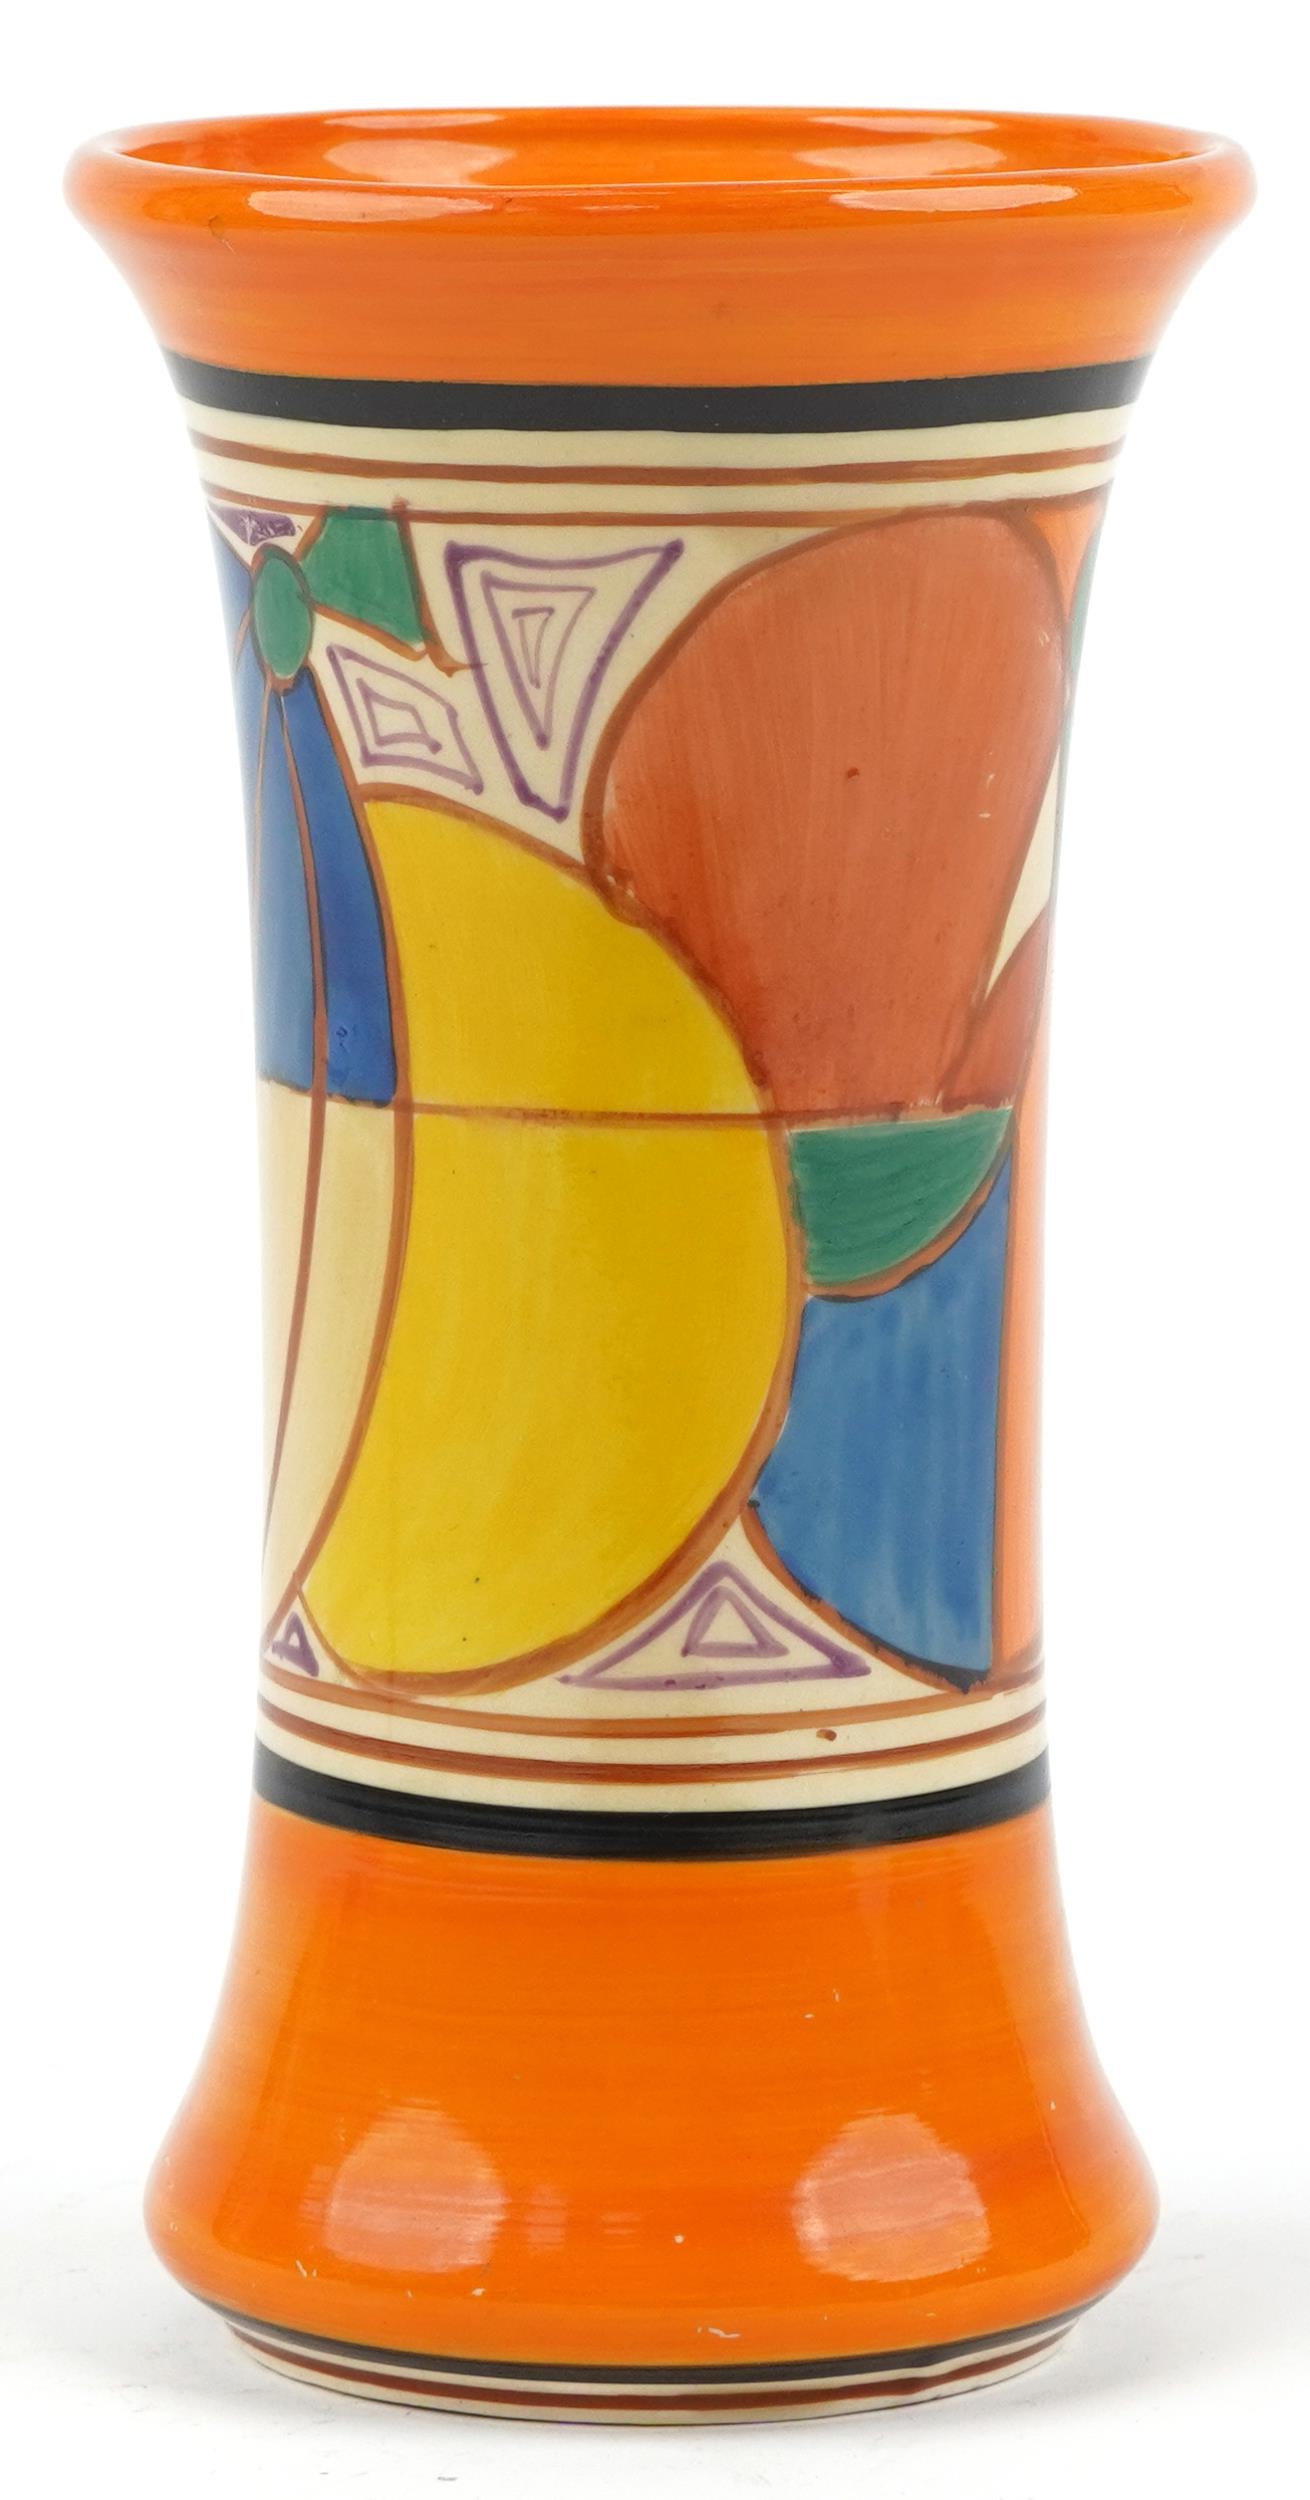 Clarice Cliff, Art Deco Fantastique Bizarre vase hand painted in the melon pattern, numbered 205 - Image 4 of 7